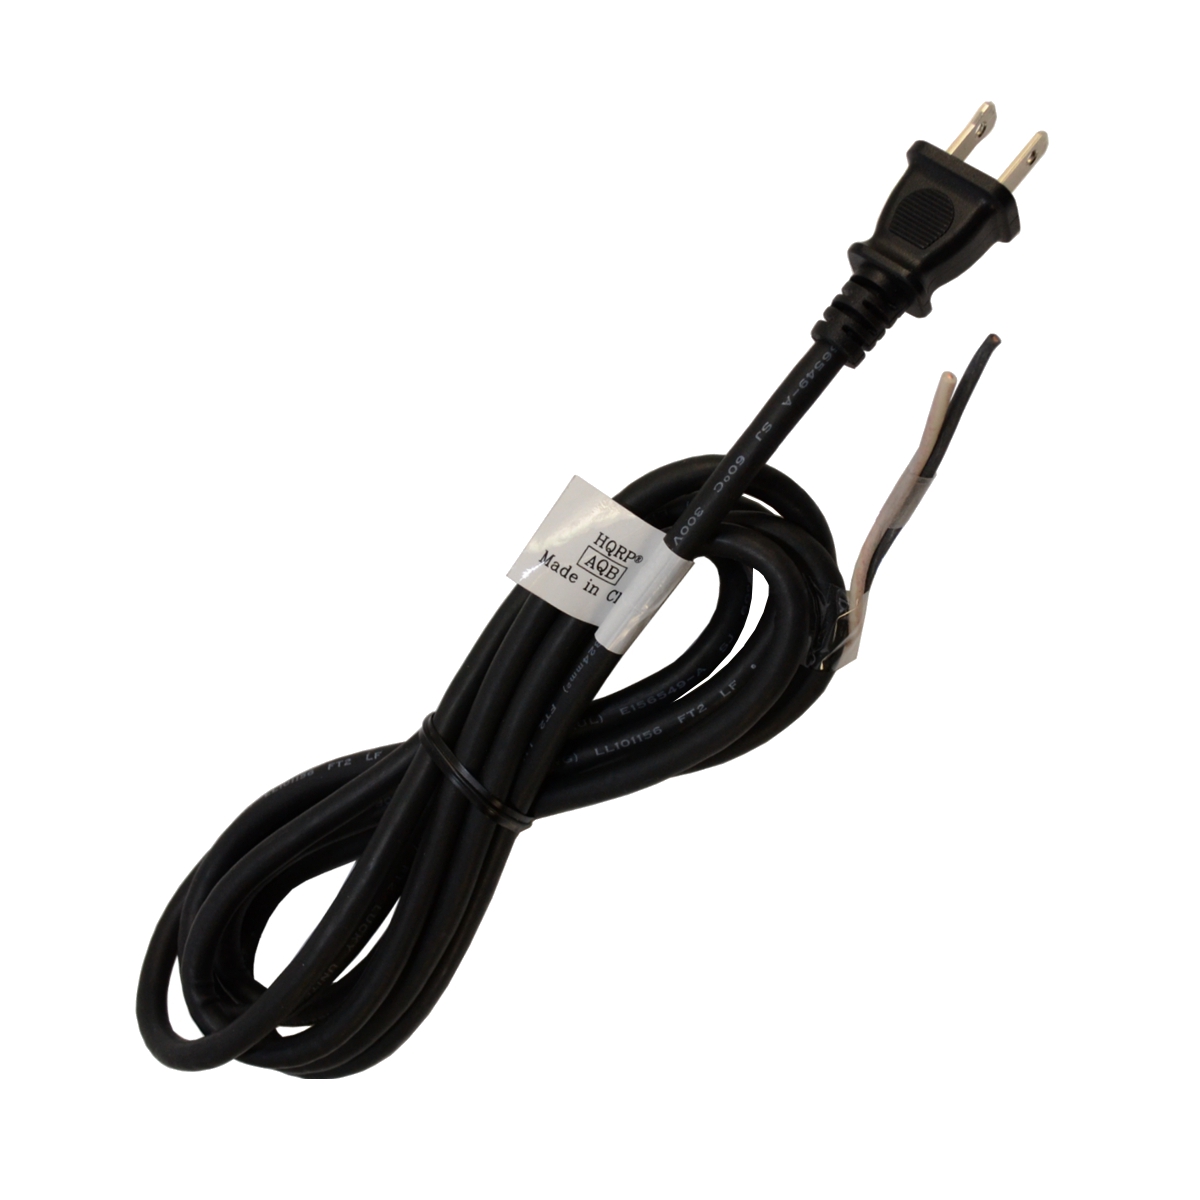 HQRP AC Power Cord for Black and Decker 1338 1339 1348 1575 2600 2601 2601 5359 6016 Electric Drill